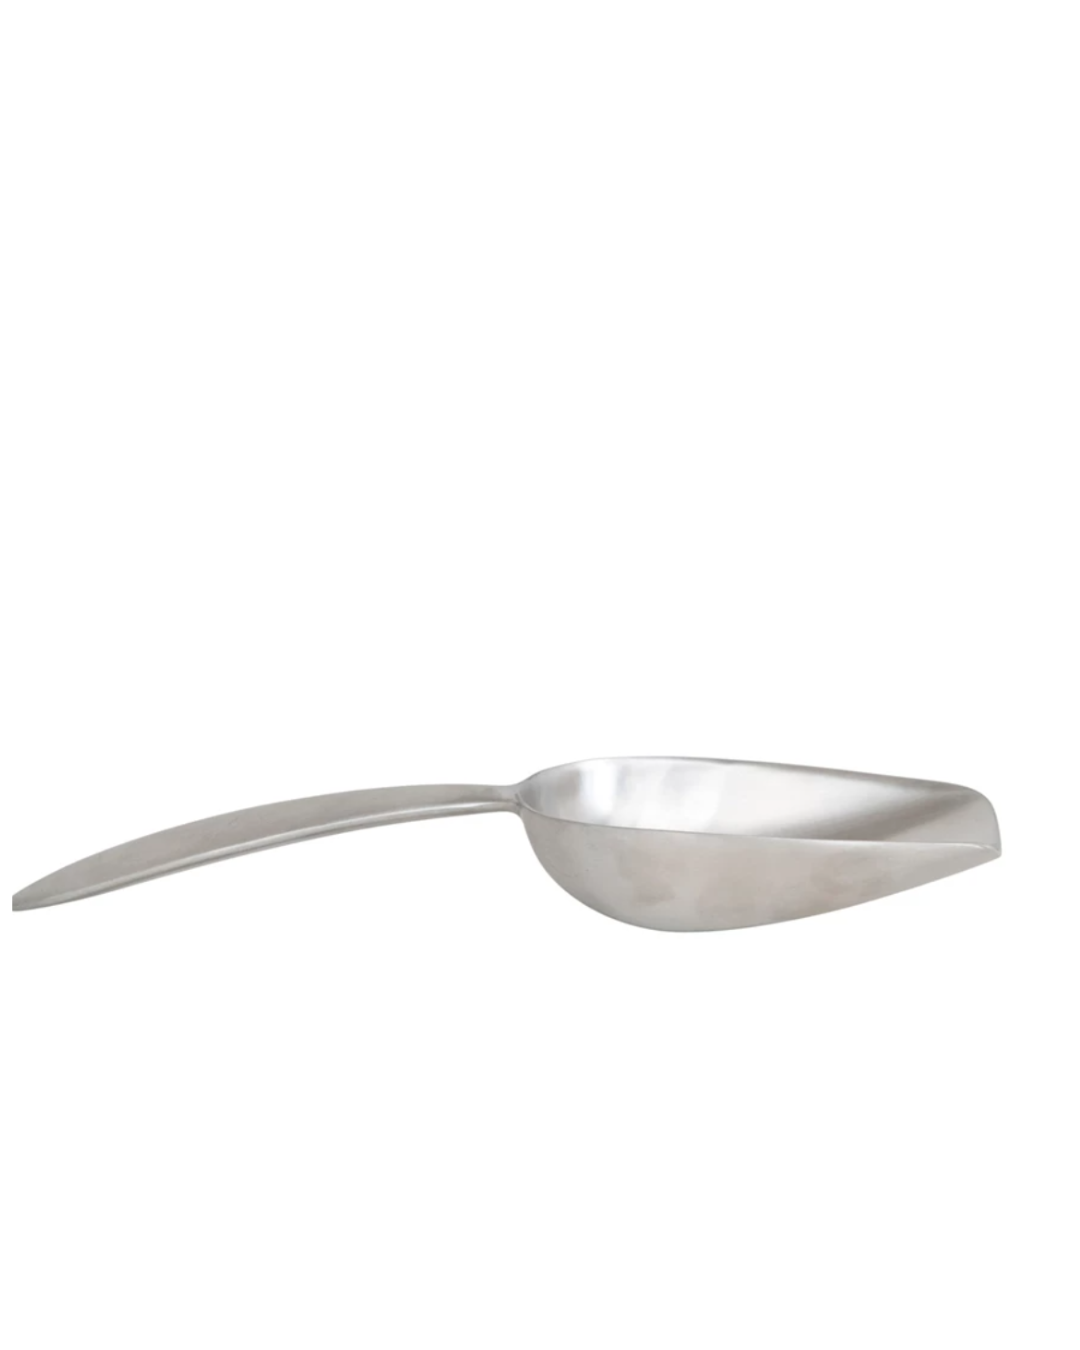 A stainless steel Metal Scoop by Creative Co-op with a sleek design is positioned horizontally against a white background.